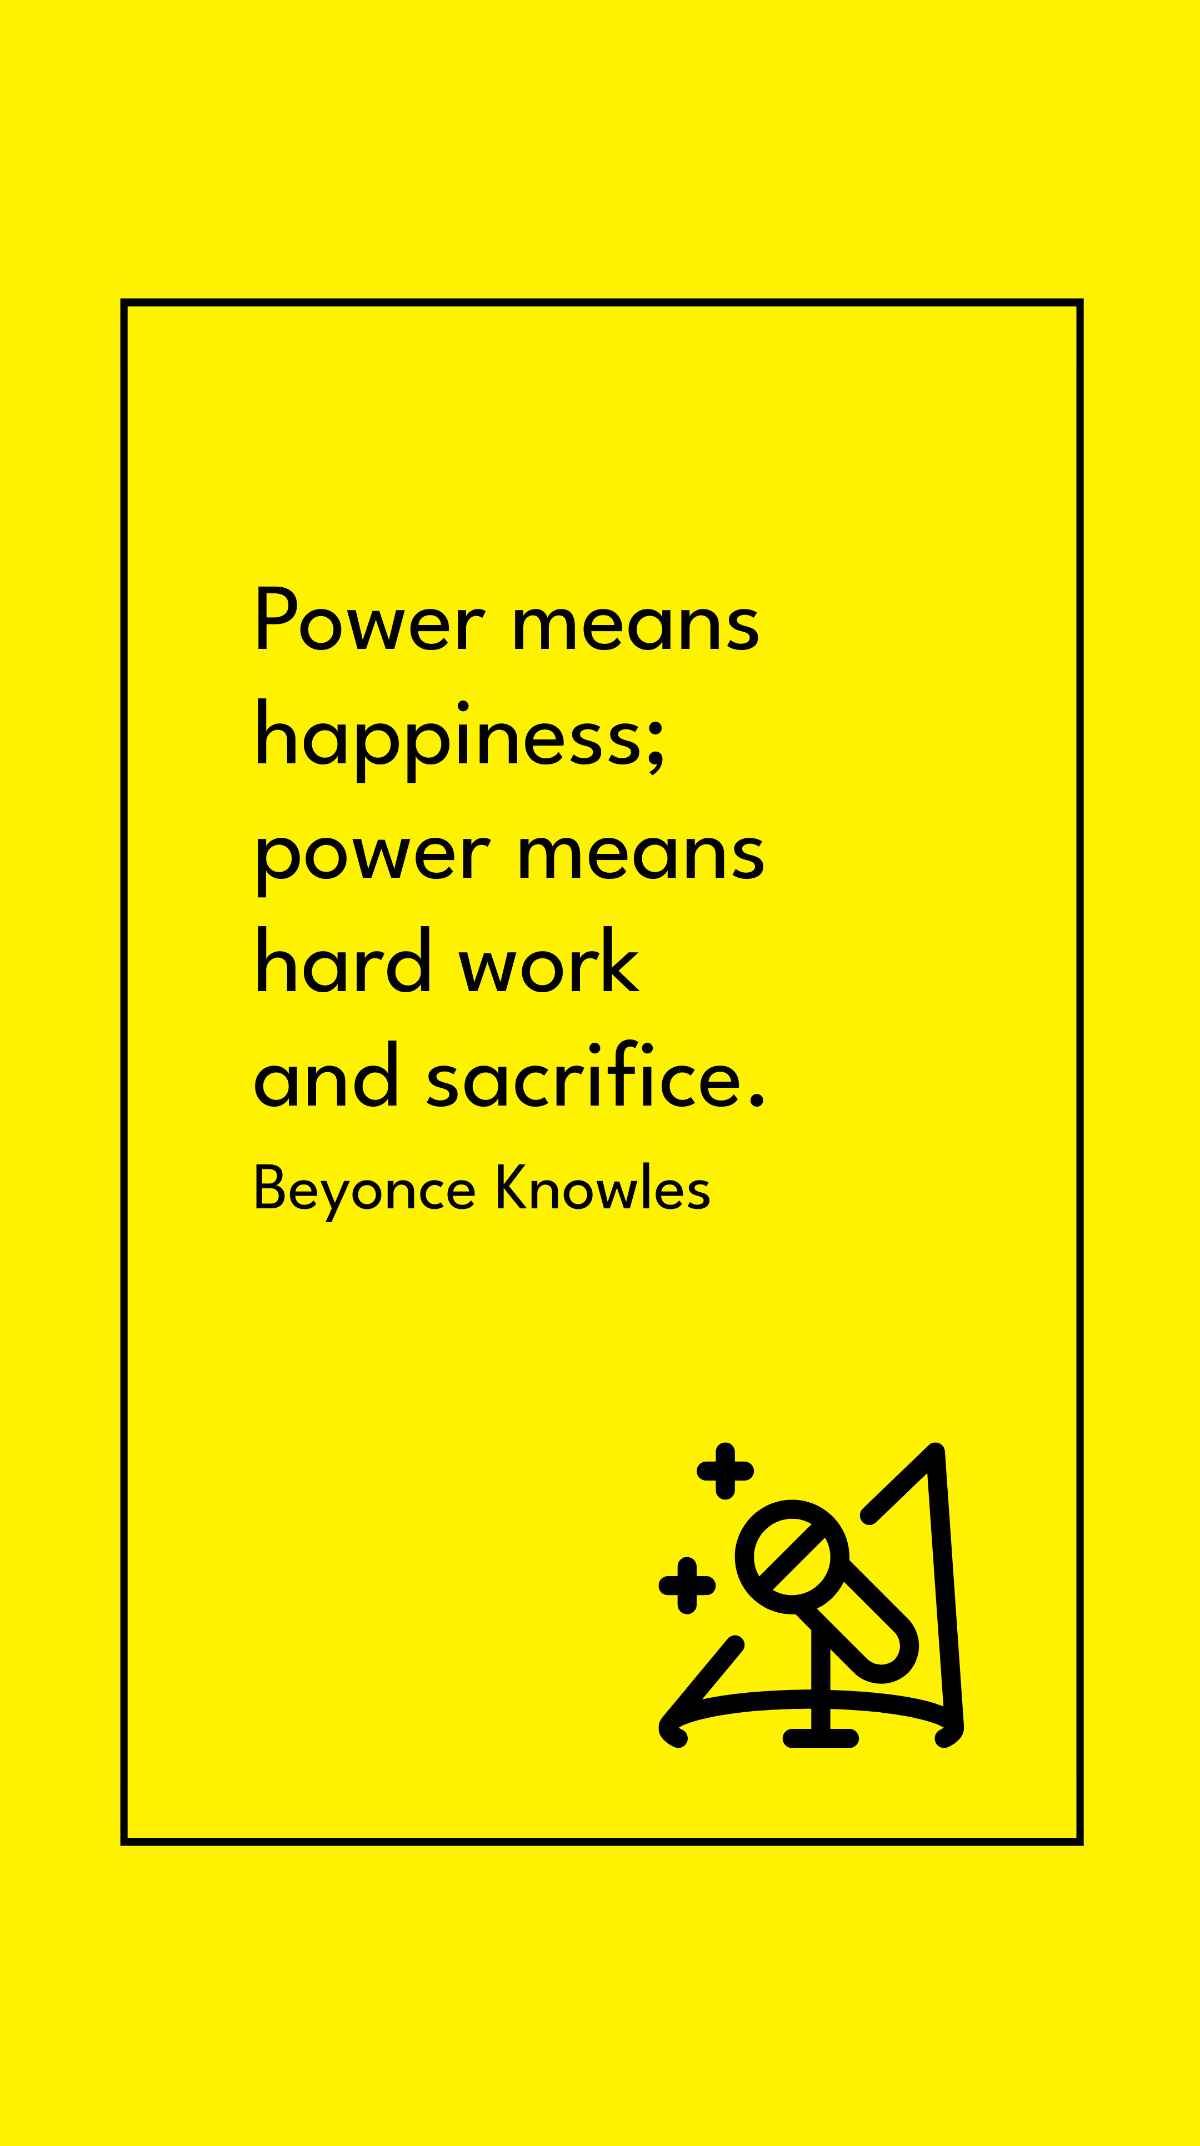 Beyonce Knowles - Power means happiness; power means hard work and sacrifice. Template